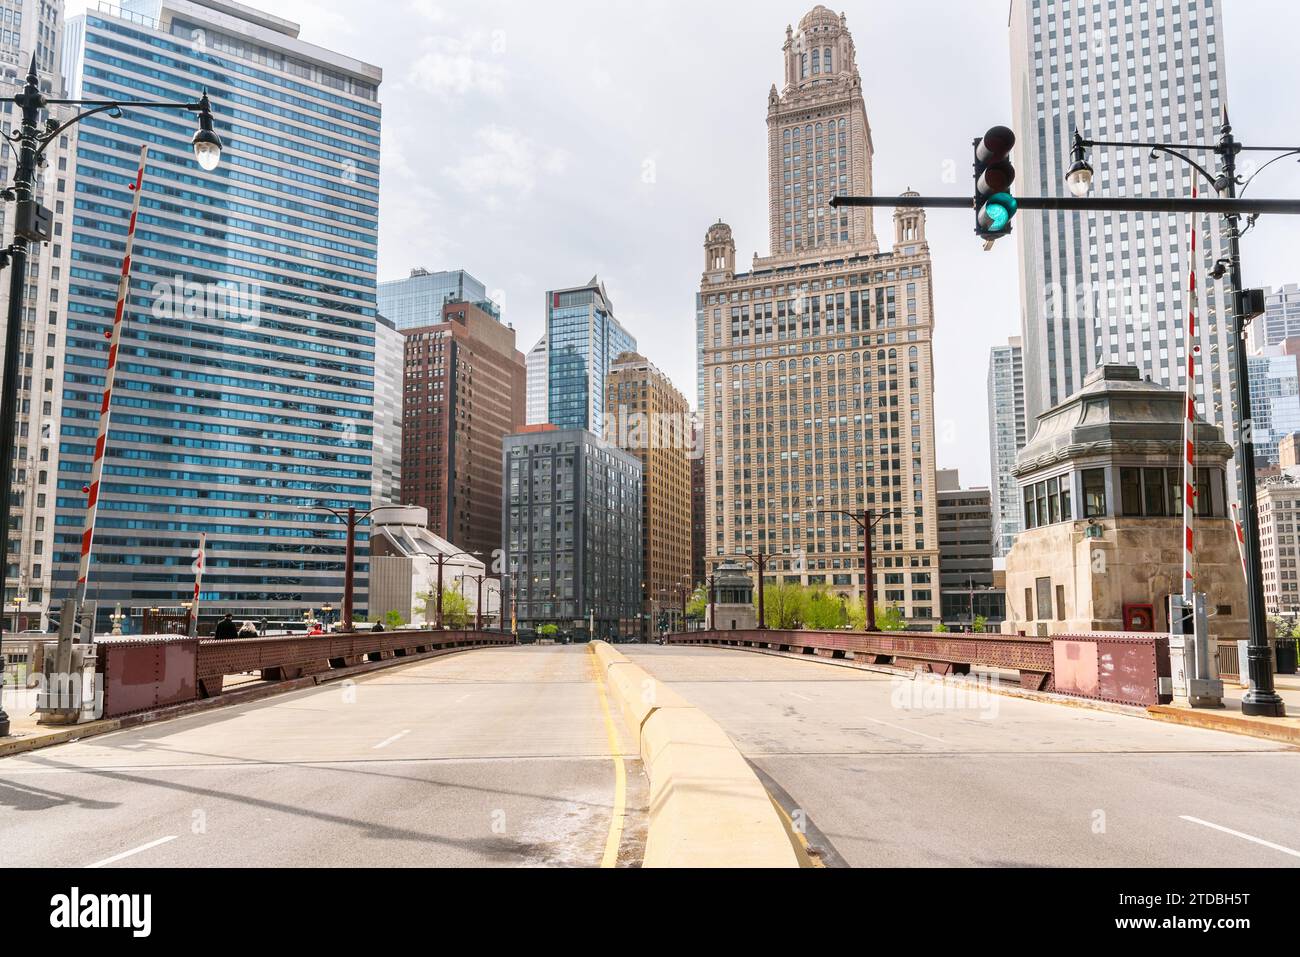 Deserted street over a bridge in downtown Chicago on a sunny spring day Stock Photo